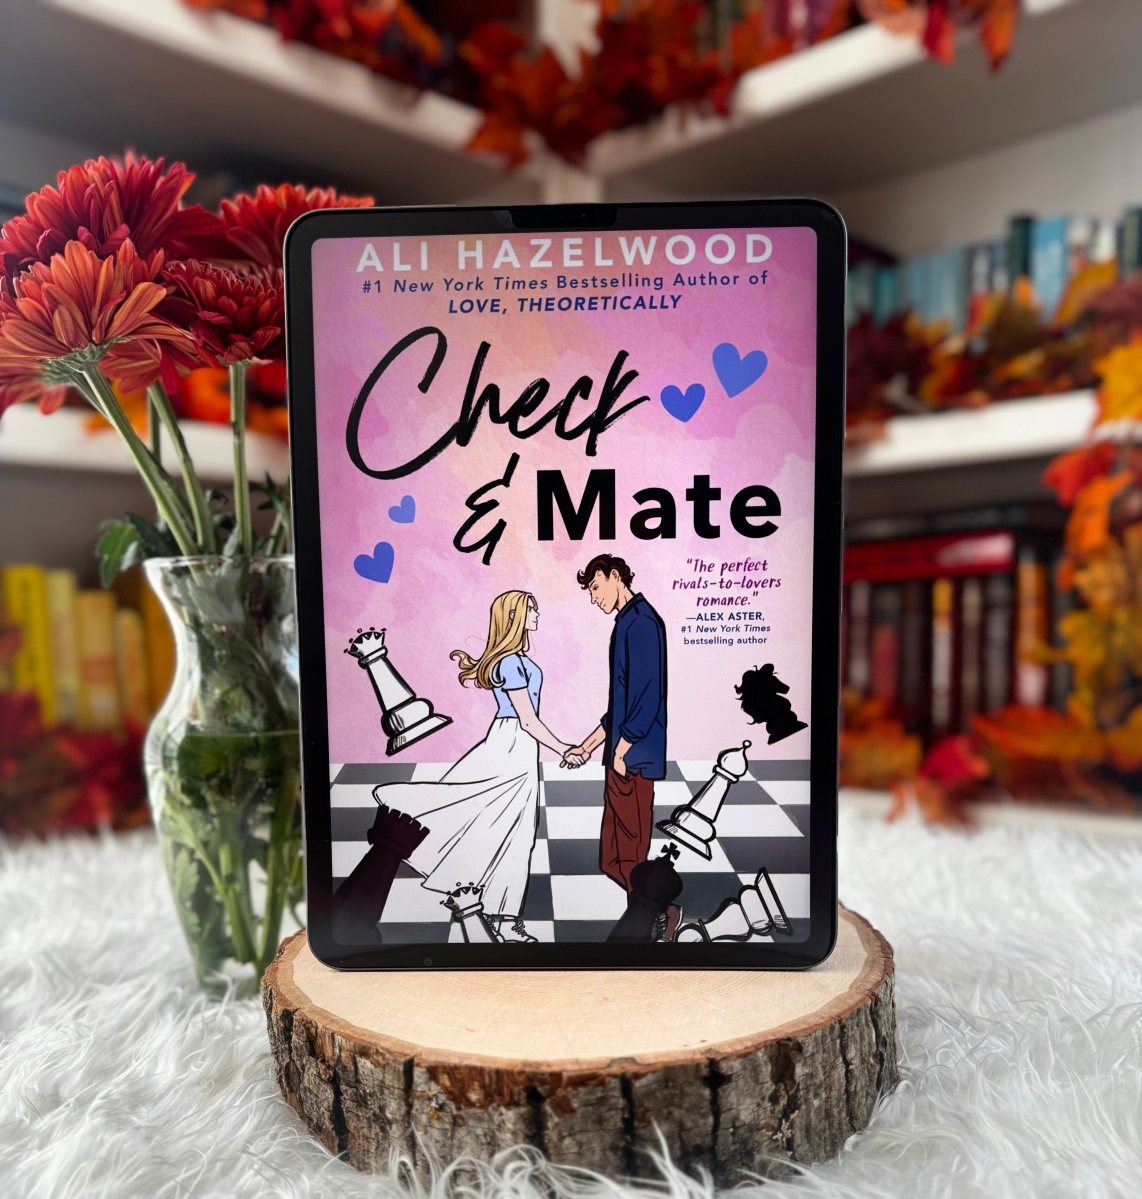 Bookstop Kw on Instagram: Check & Mate By Ali Hazelwood Upper YA Romance  Age Rating: 16+ Overview: In this clever and swoonworthy YA debut from the  New York Times bestselling author of